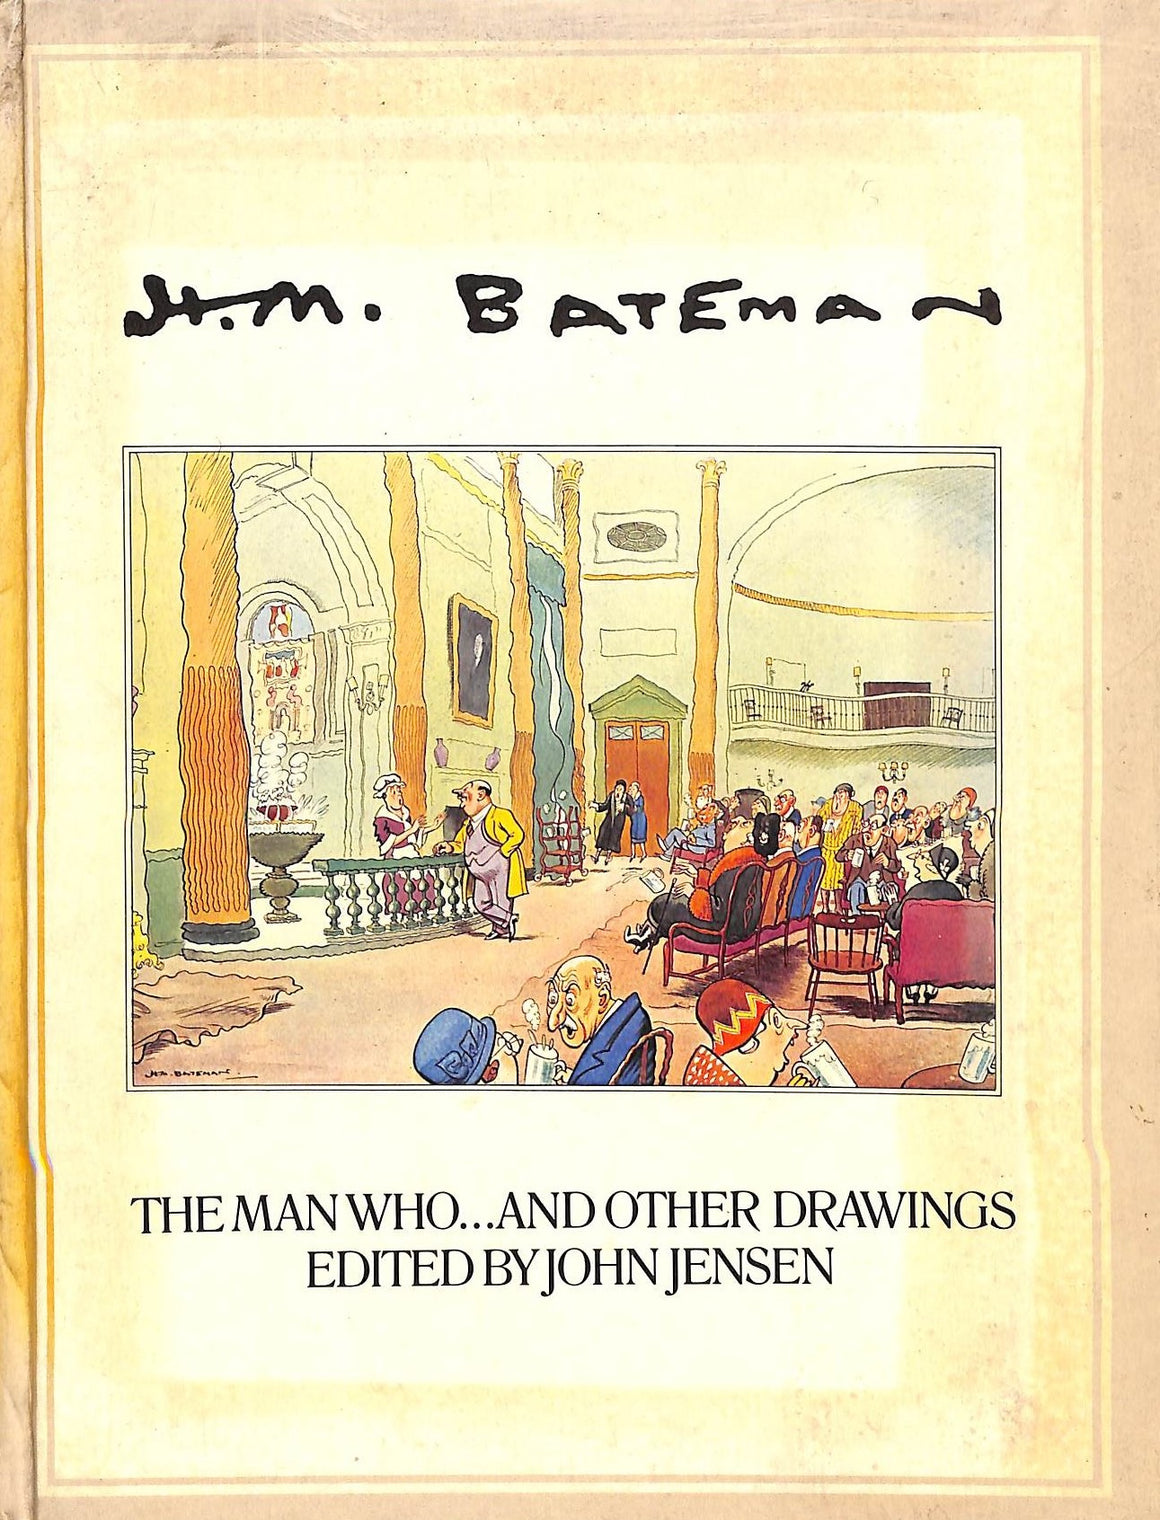 "H.M. Bateman The Man Who... And Other Drawings" JENSEN, John [edited by]